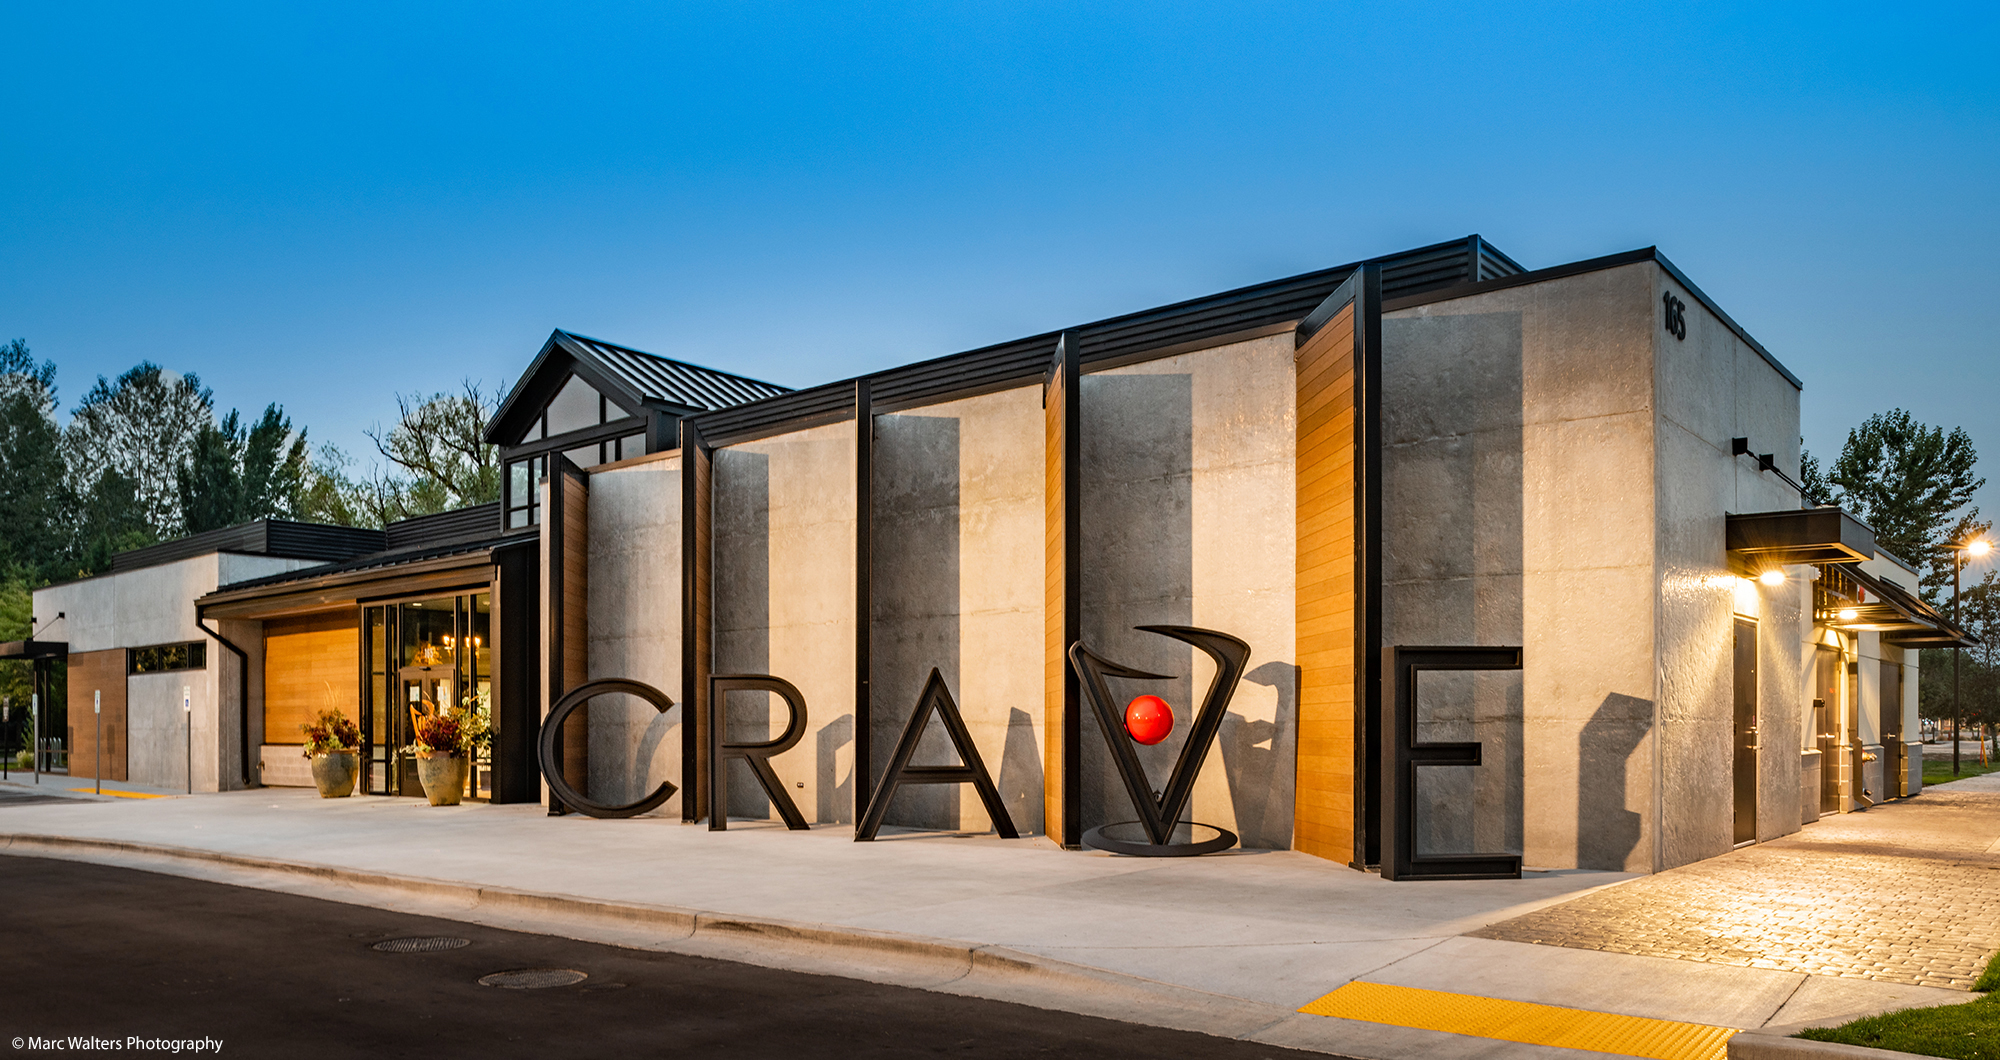 Crave-Kitchen-and-Bar-Exterior-01